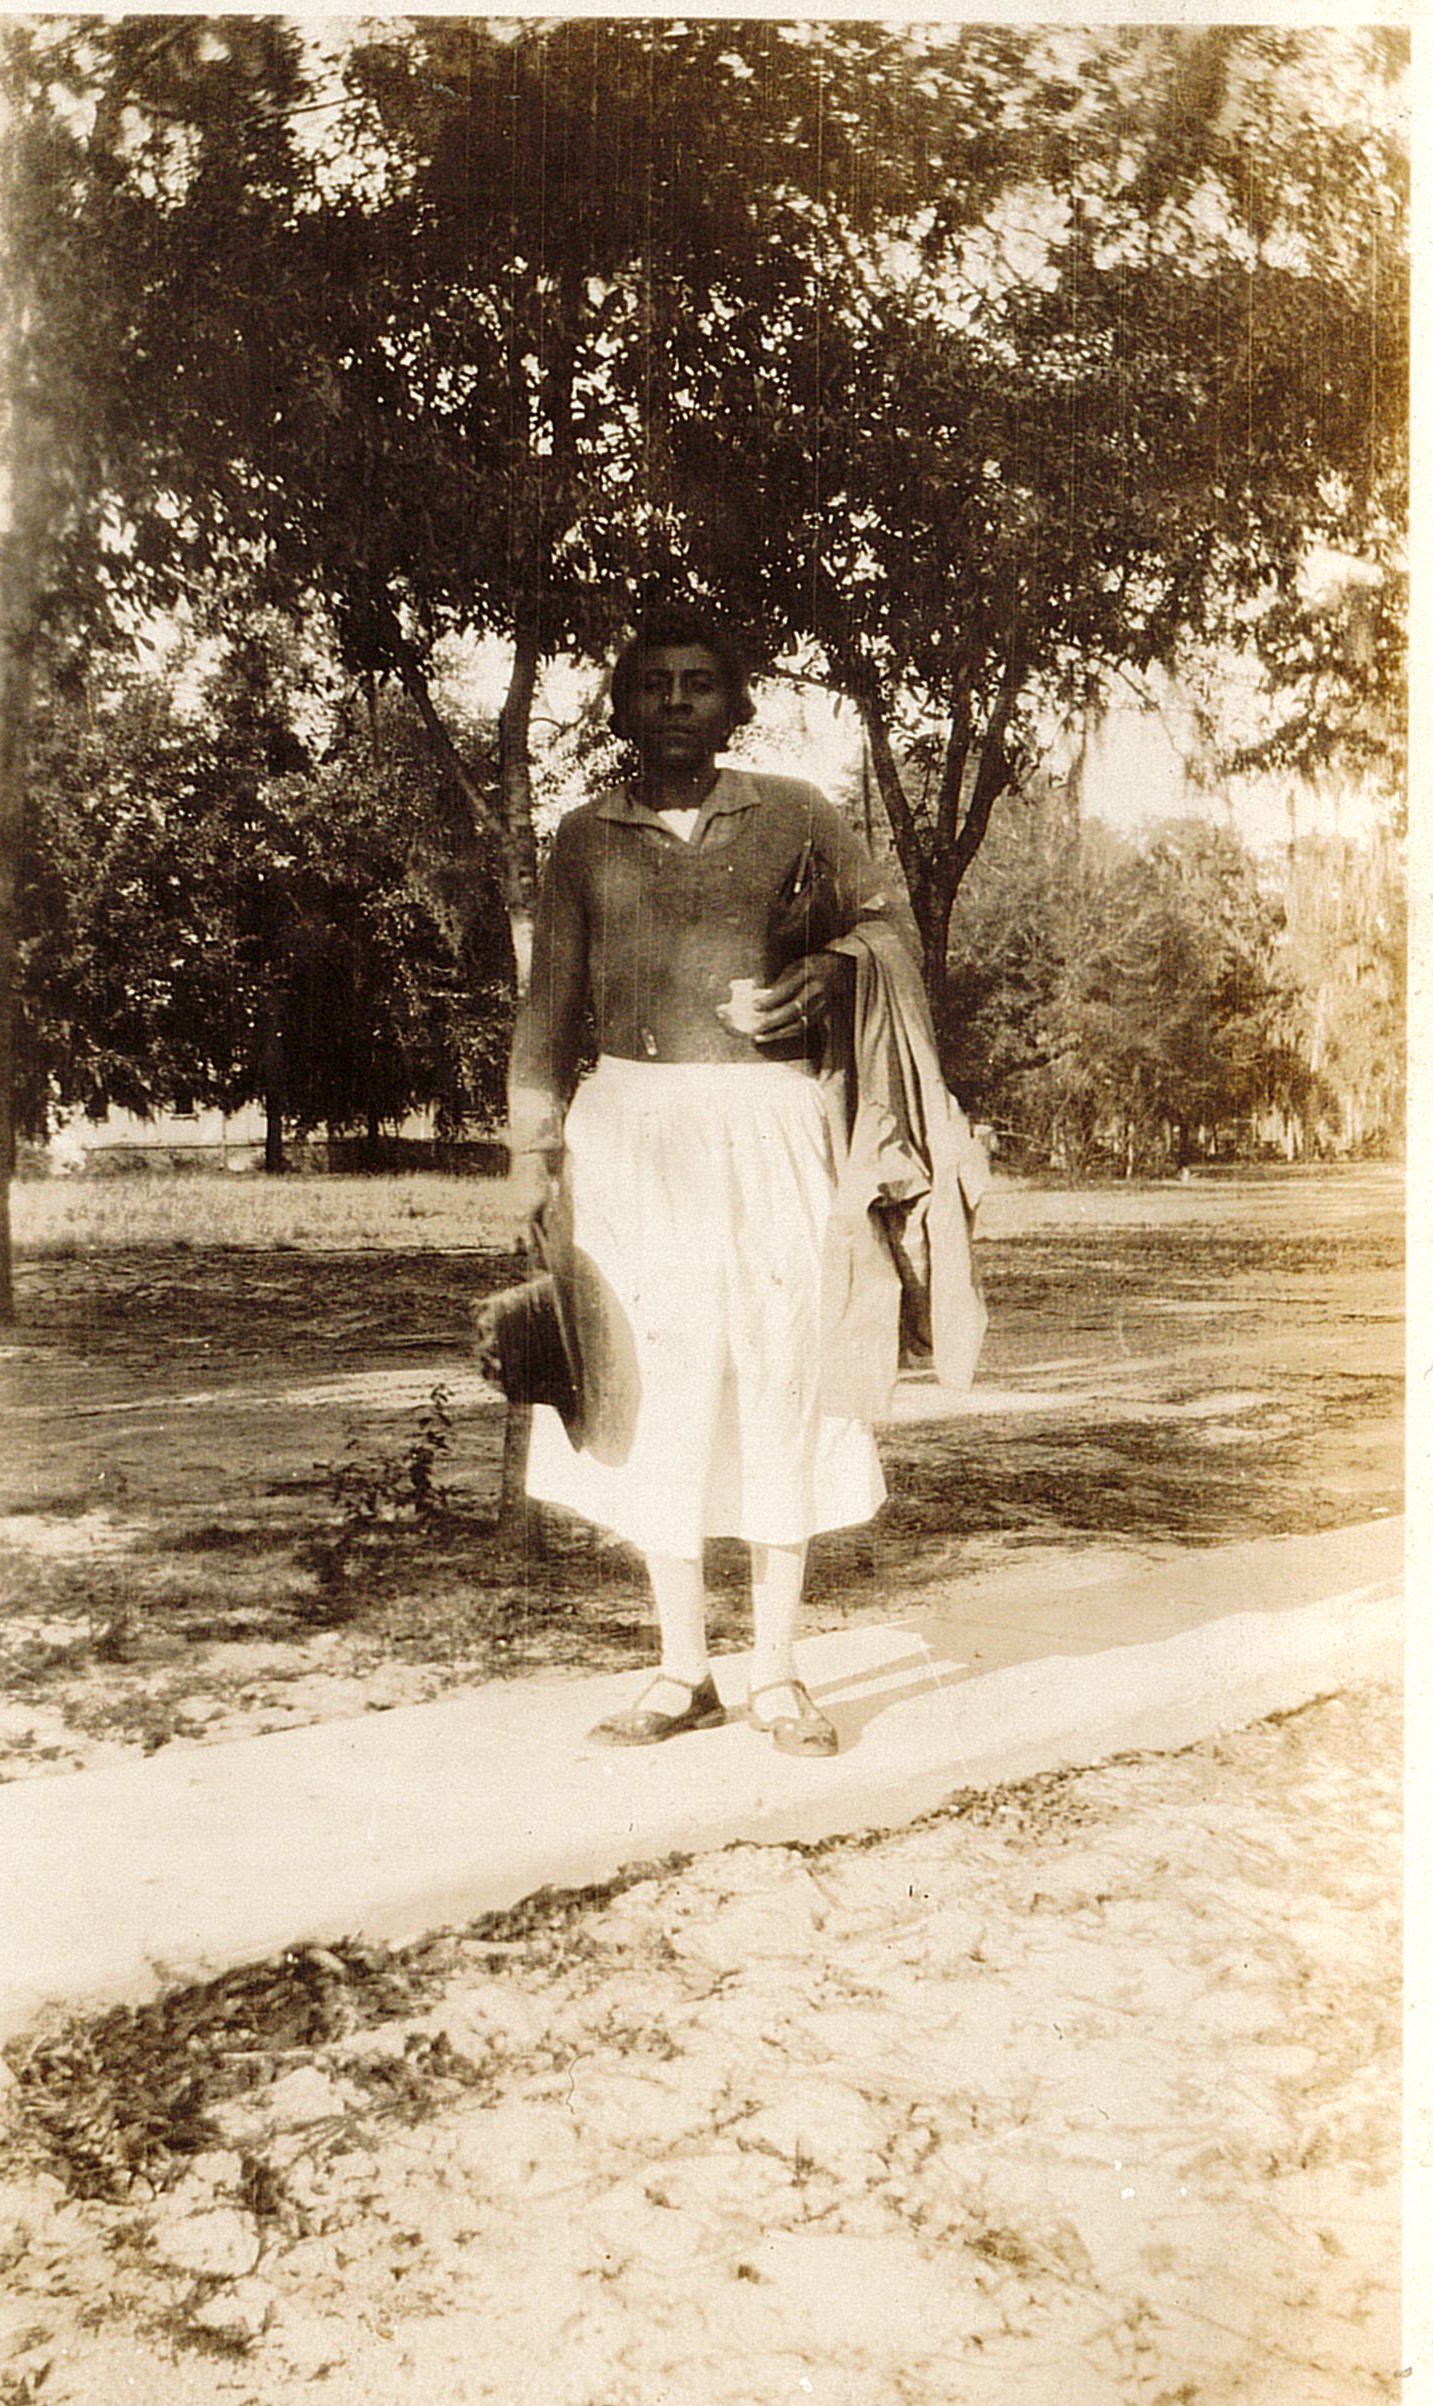 Susie [no last name provided], who lived in Hannibal Square, was a domestic worker at Rollins College when this photograph was taken in the 1930s.